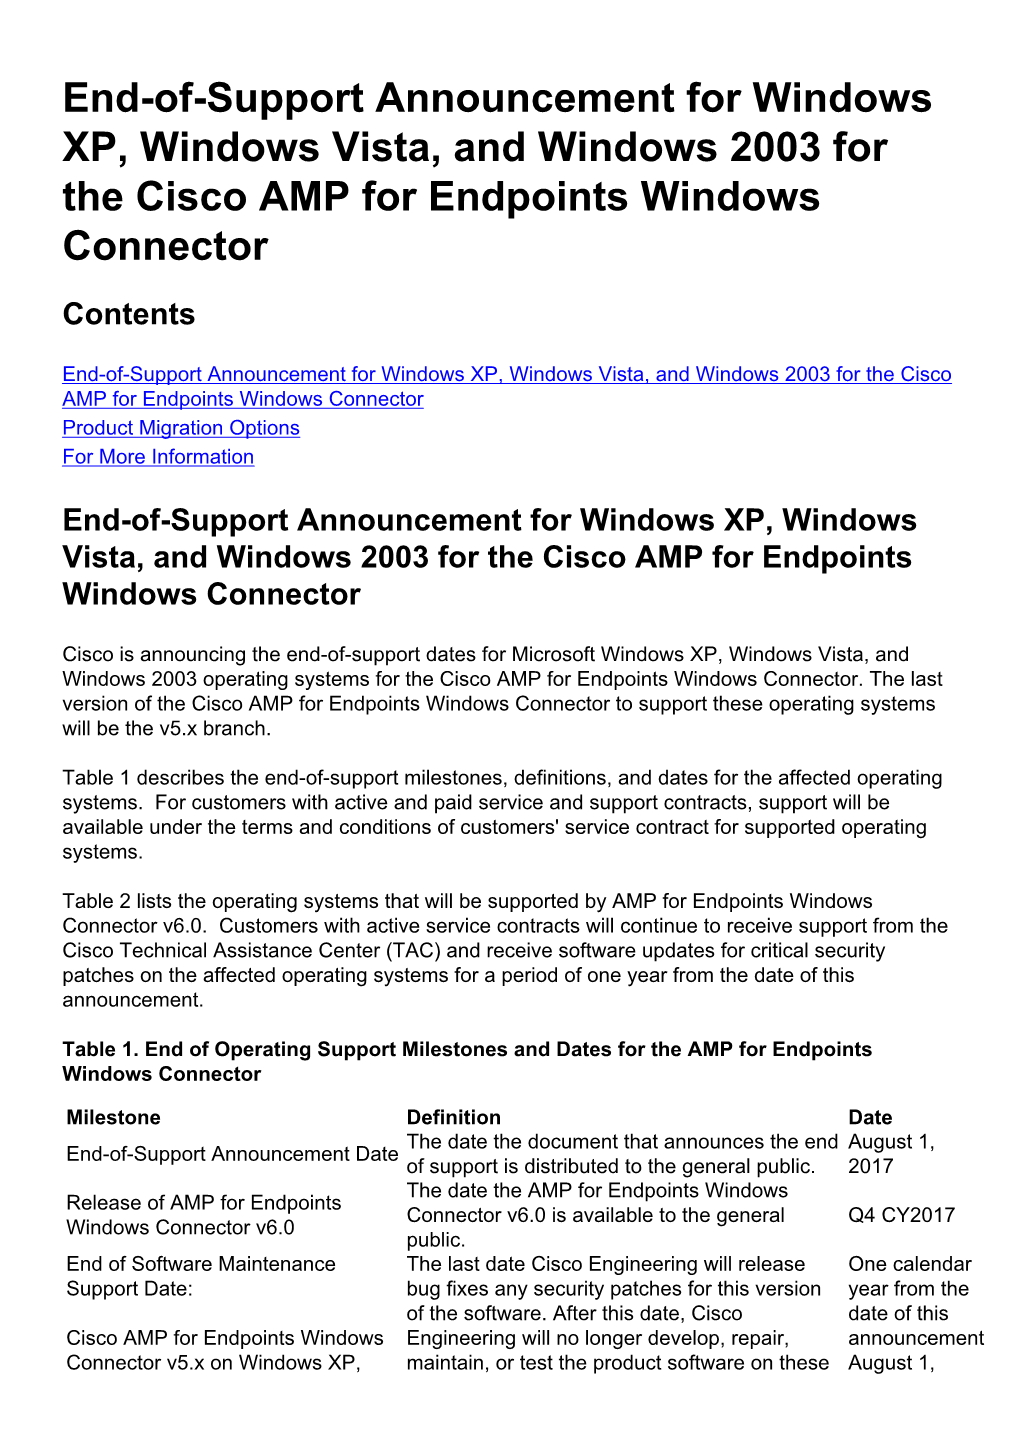 End-Of-Support Announcement for Windows XP, Windows Vista, and Windows 2003 for the Cisco AMP for Endpoints Windows Connector